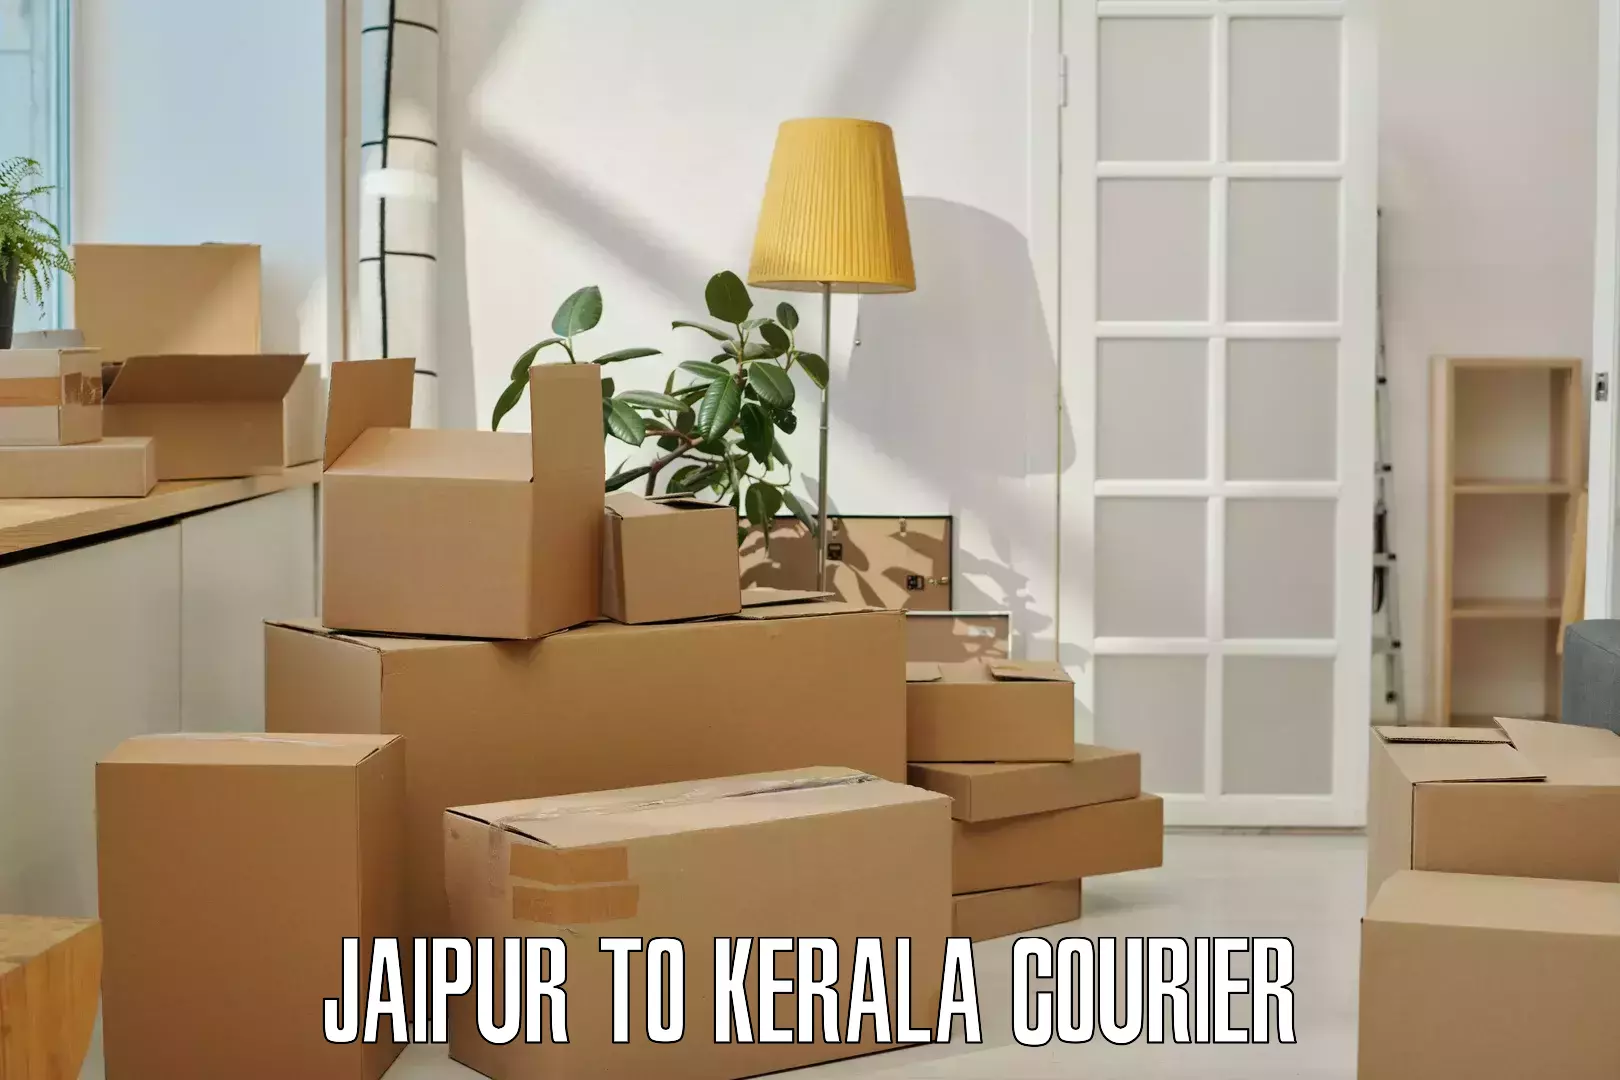 State-of-the-art courier technology Jaipur to Kalpetta